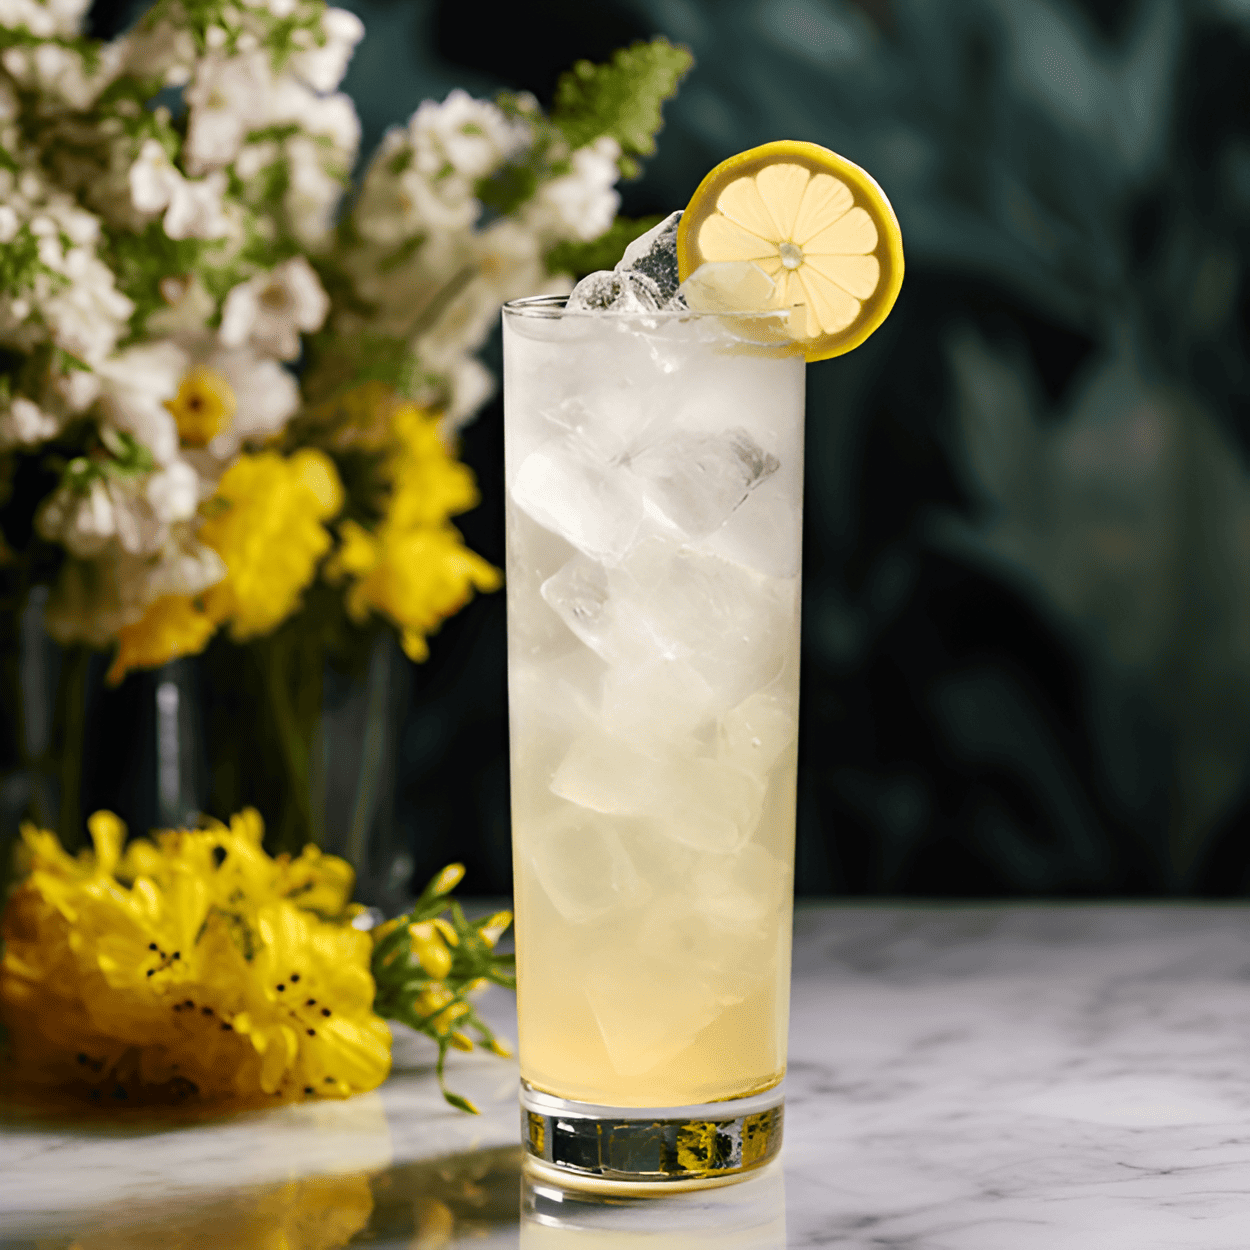 Nordic Summer Cocktail Recipe - The Nordic Summer is a light, refreshing cocktail with a fruity taste. It has a hint of citrus from the lemon juice, and the elderflower cordial adds a sweet, floral note. The gin gives it a slight kick, but it's not overly strong.